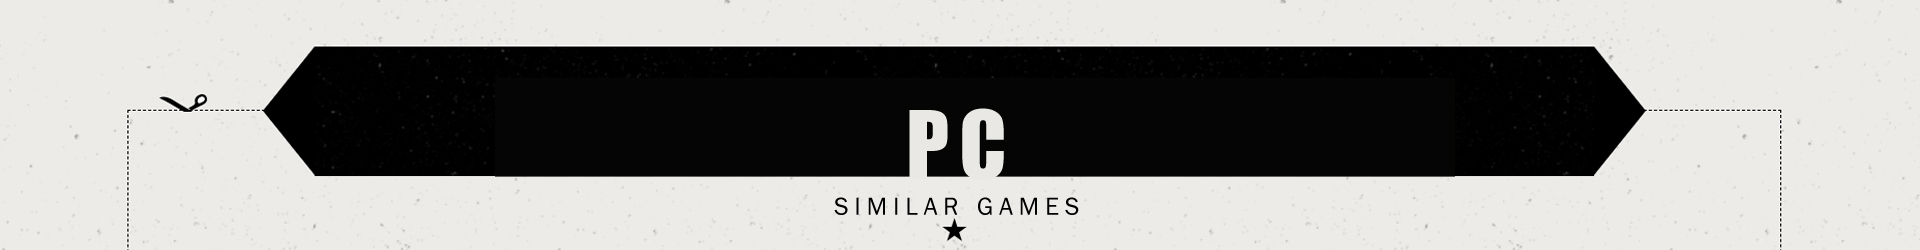 Post-Apocalyptic Games Like Fallout on PC